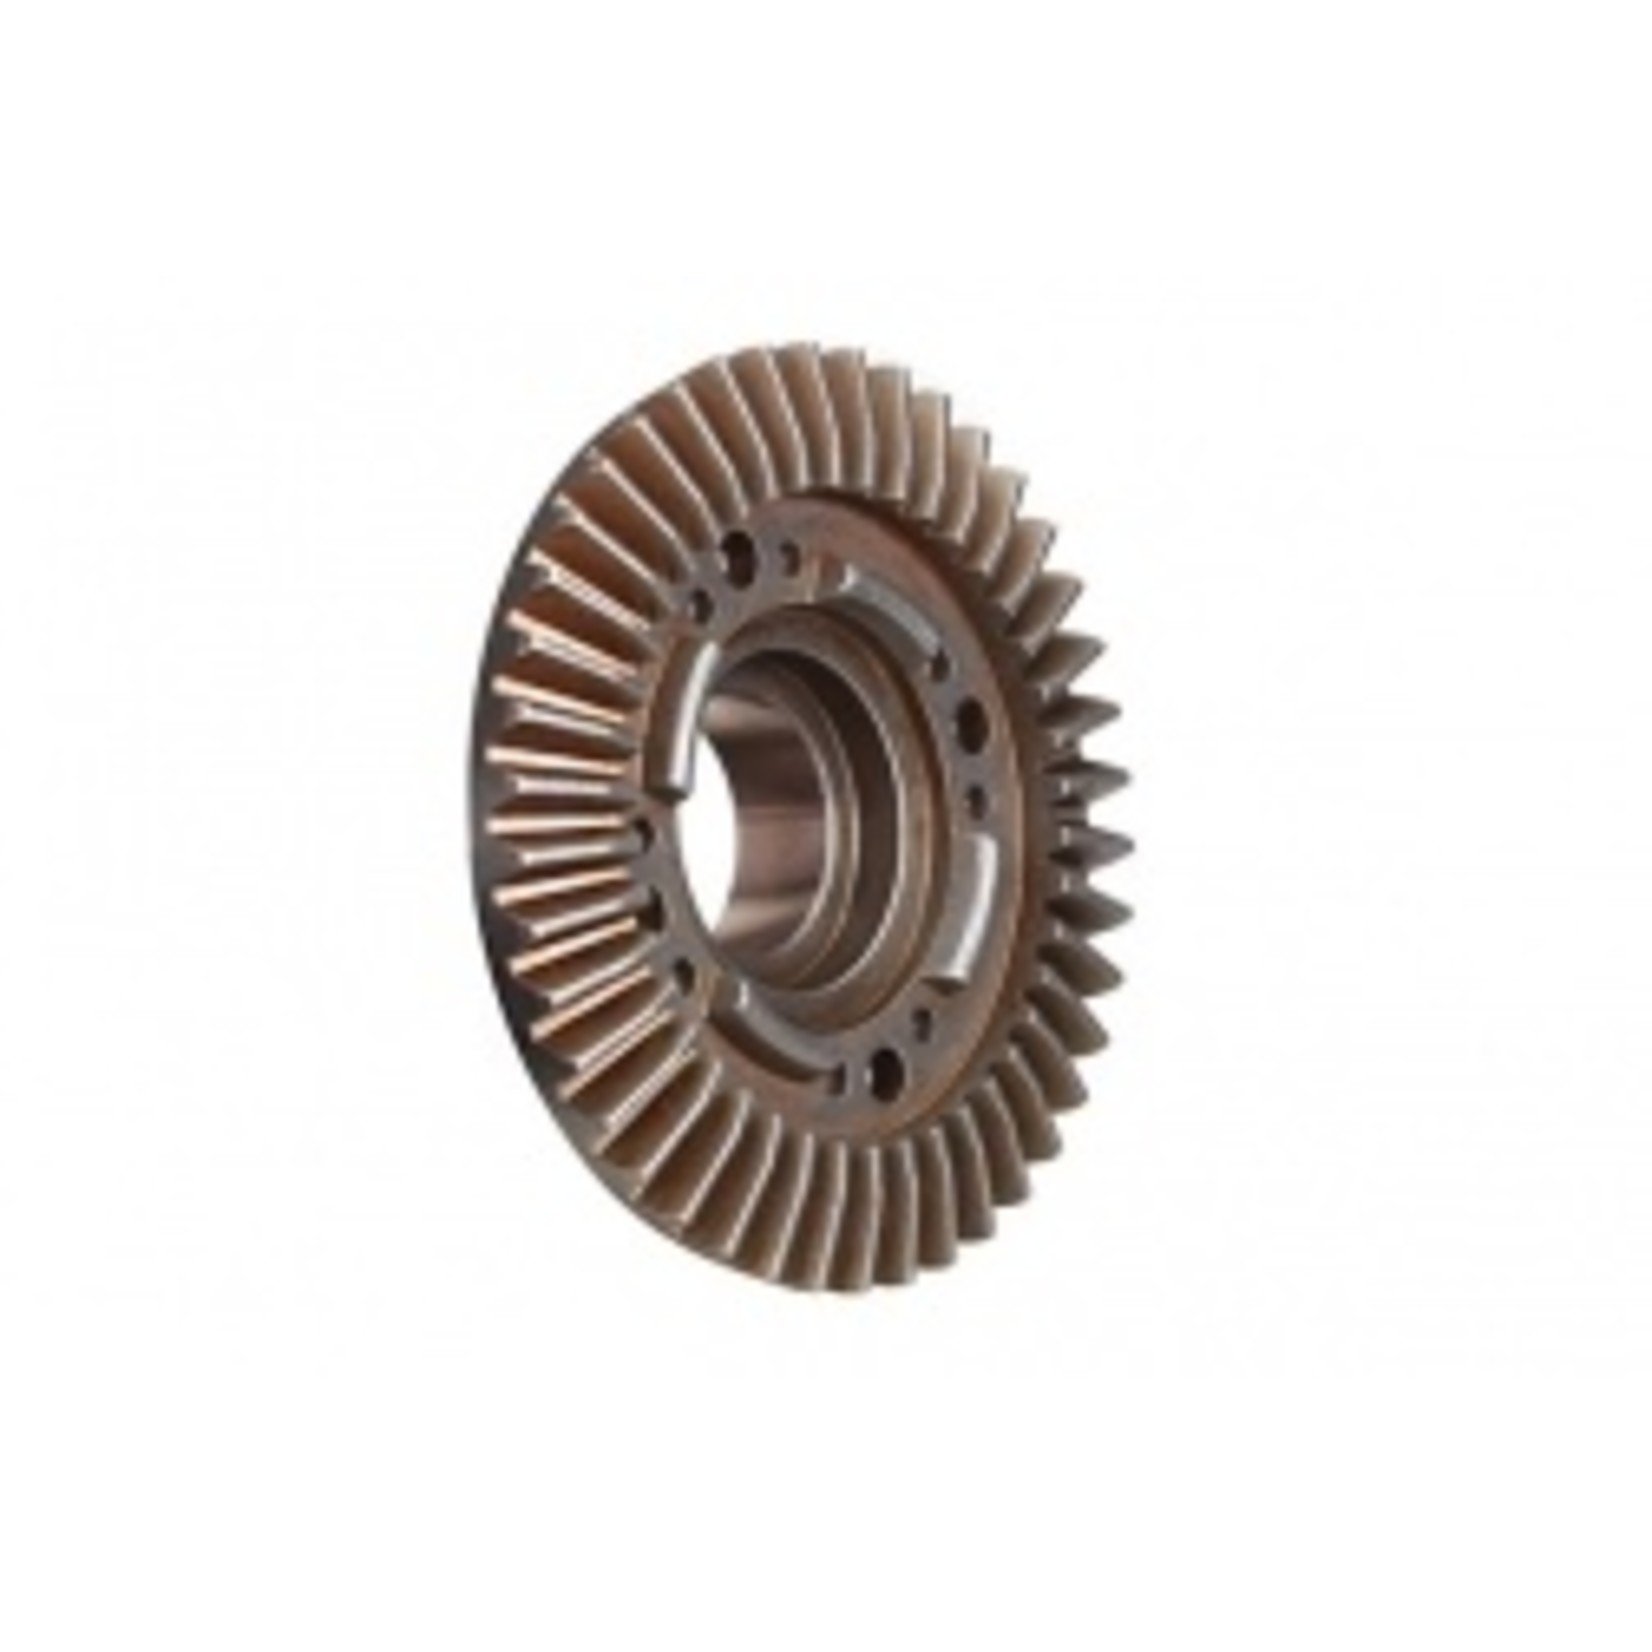 Traxxas Ring gear, differential, 42-tooth (use with #7777, 7778 13-tooth differential pinion gears)